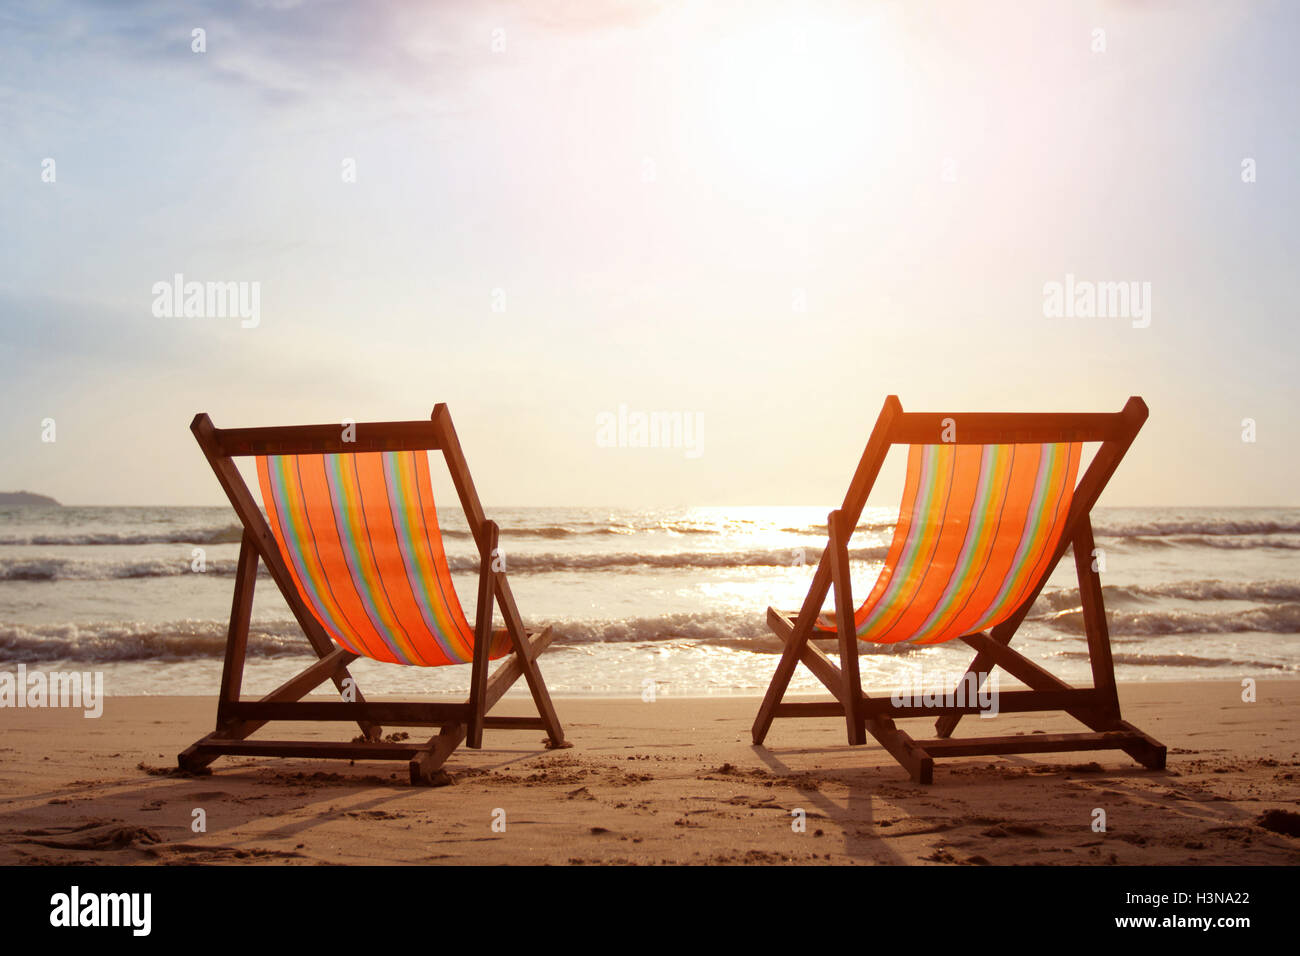 Two deckchairs on the beach with bright sun and waves Stock Photo